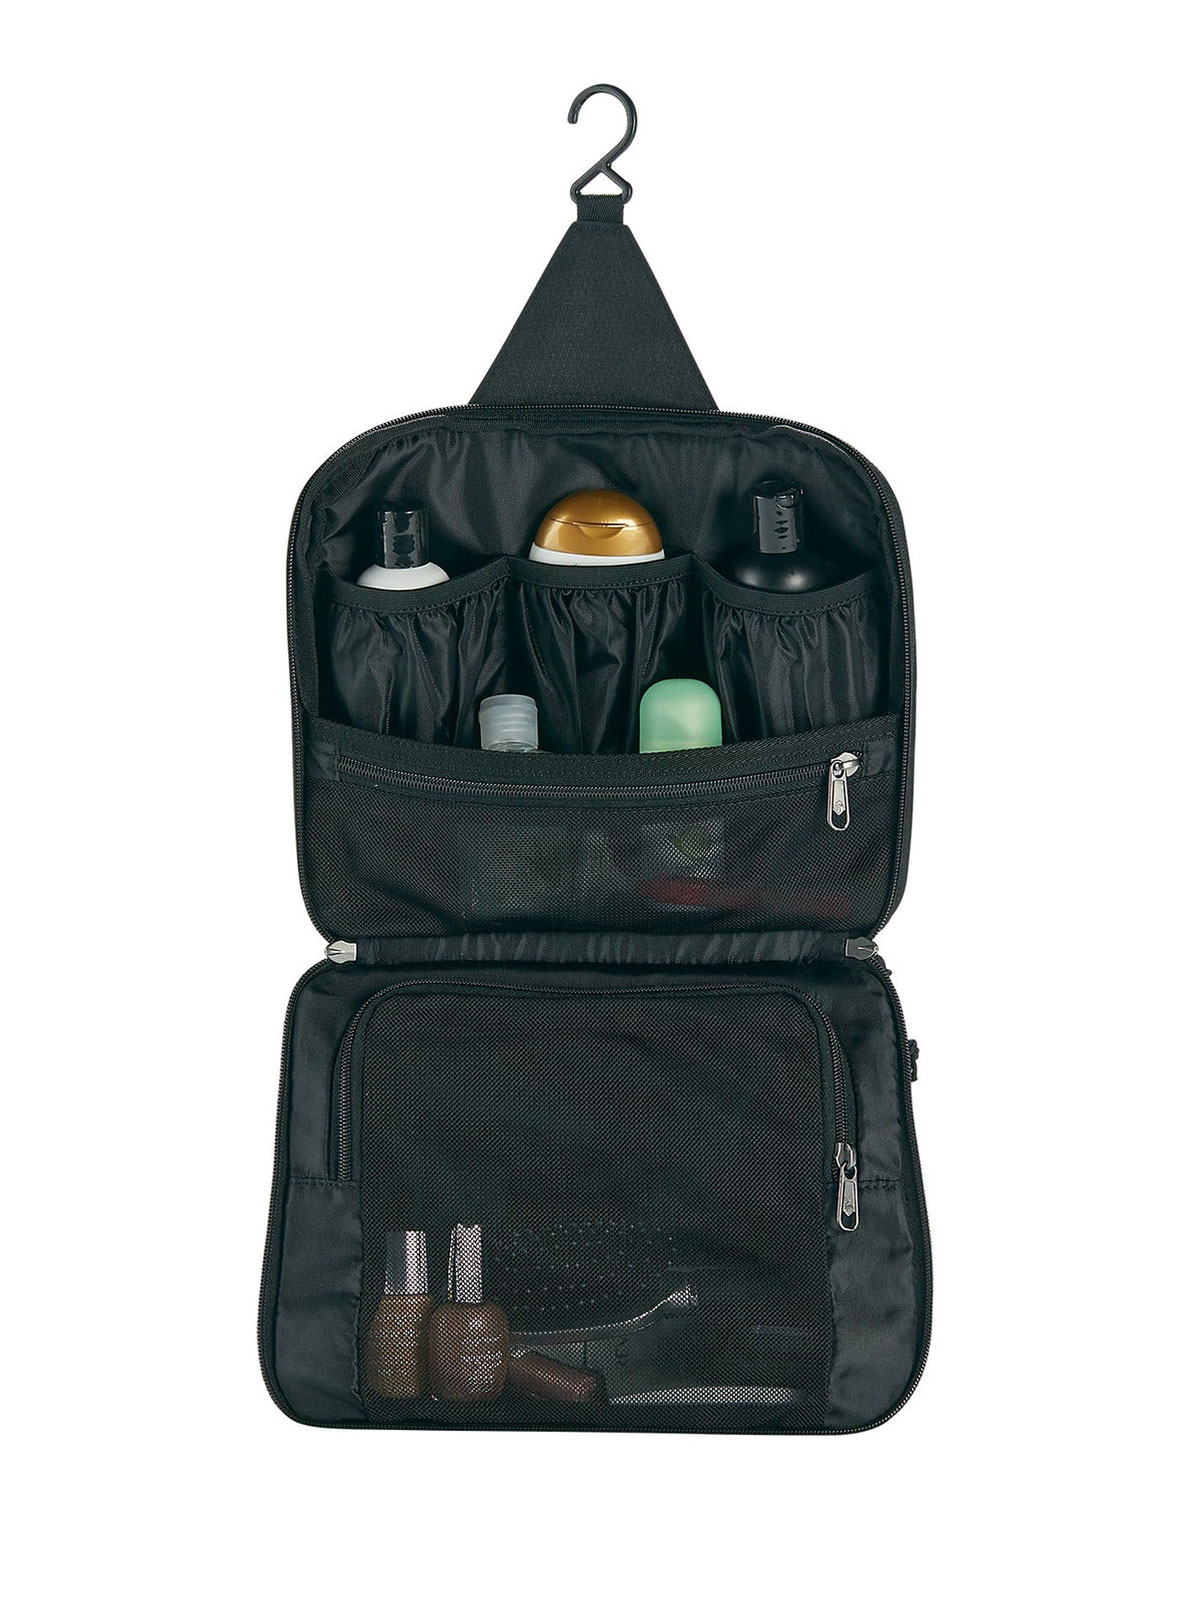 Pack-it Reveal Hanging Toiletry Kit